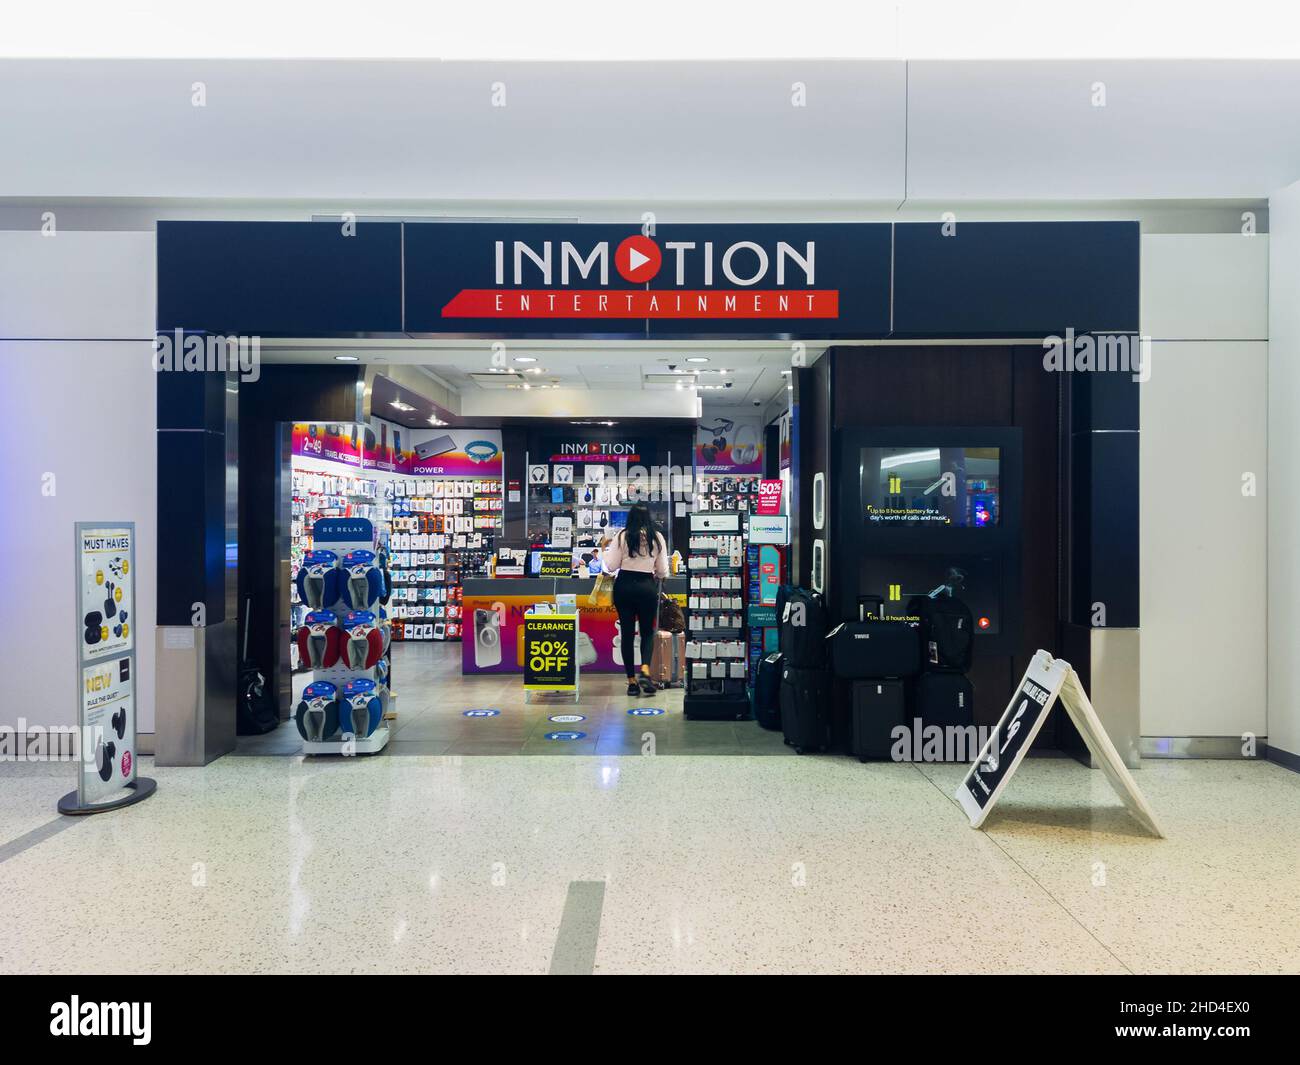 New York, USA - December 25, 2021: Horizontal View of InMotion Entertainment Shop inside John F. Kennedy Airport Terminal 5, InMotion InMotion is the Stock Photo